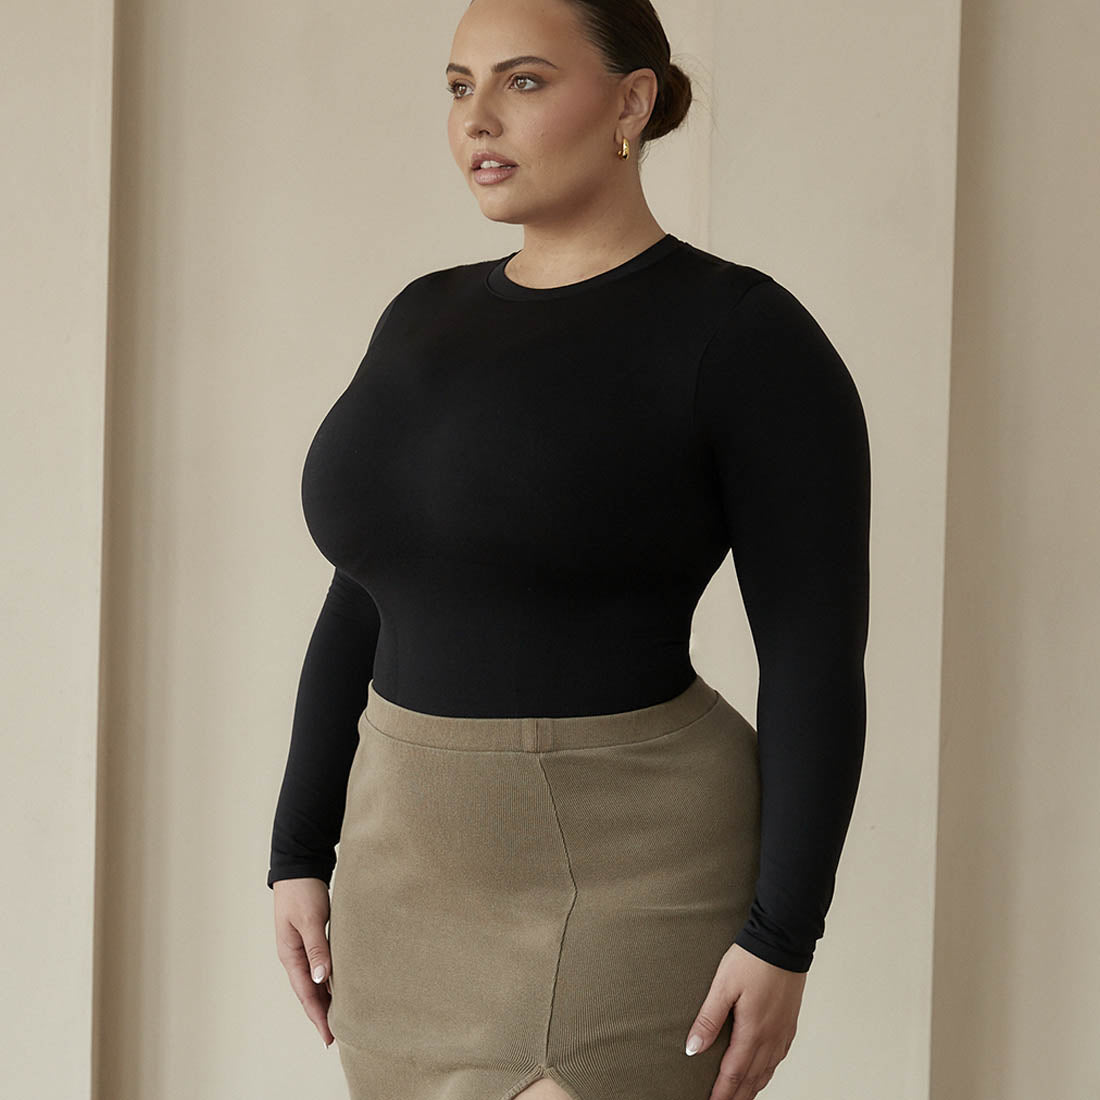 Shapewear/bodysuit?! 🤯 BEST INVENTION EVER! this long sleeve bodysuit,  Shapewear Bodysuit